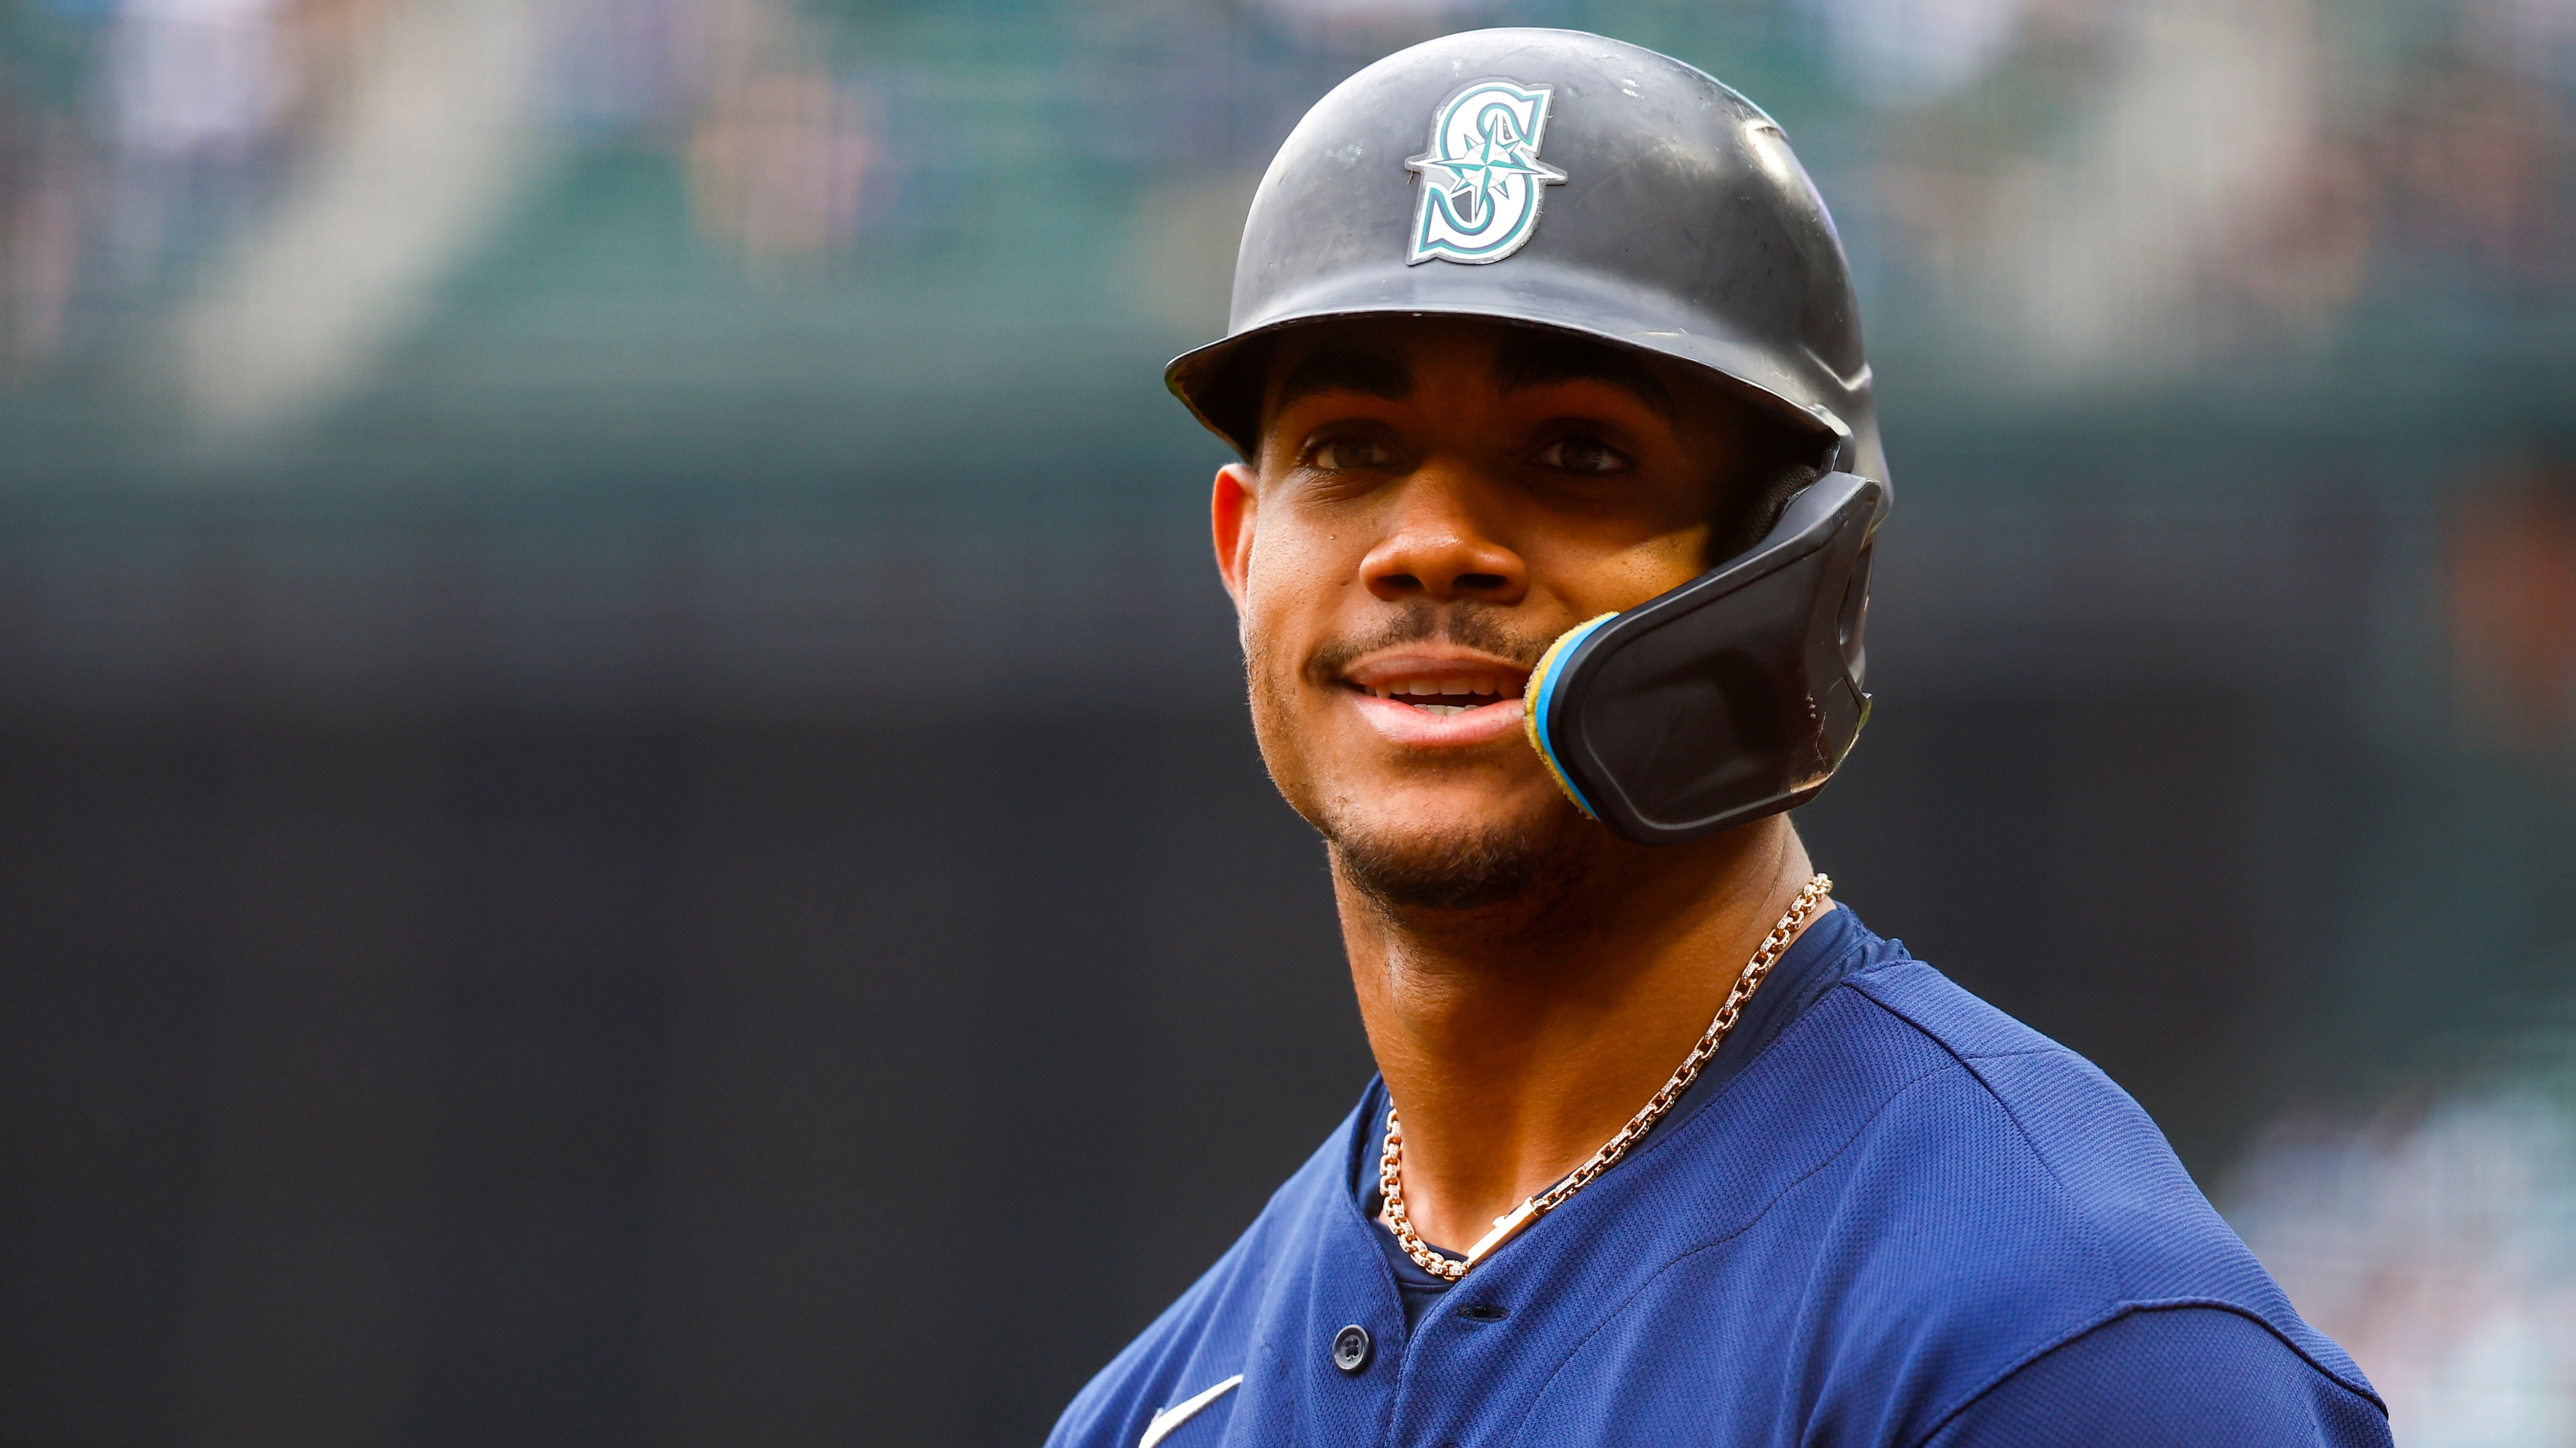 Kyle Lewis Named to All-Star Futures Game, by Mariners PR